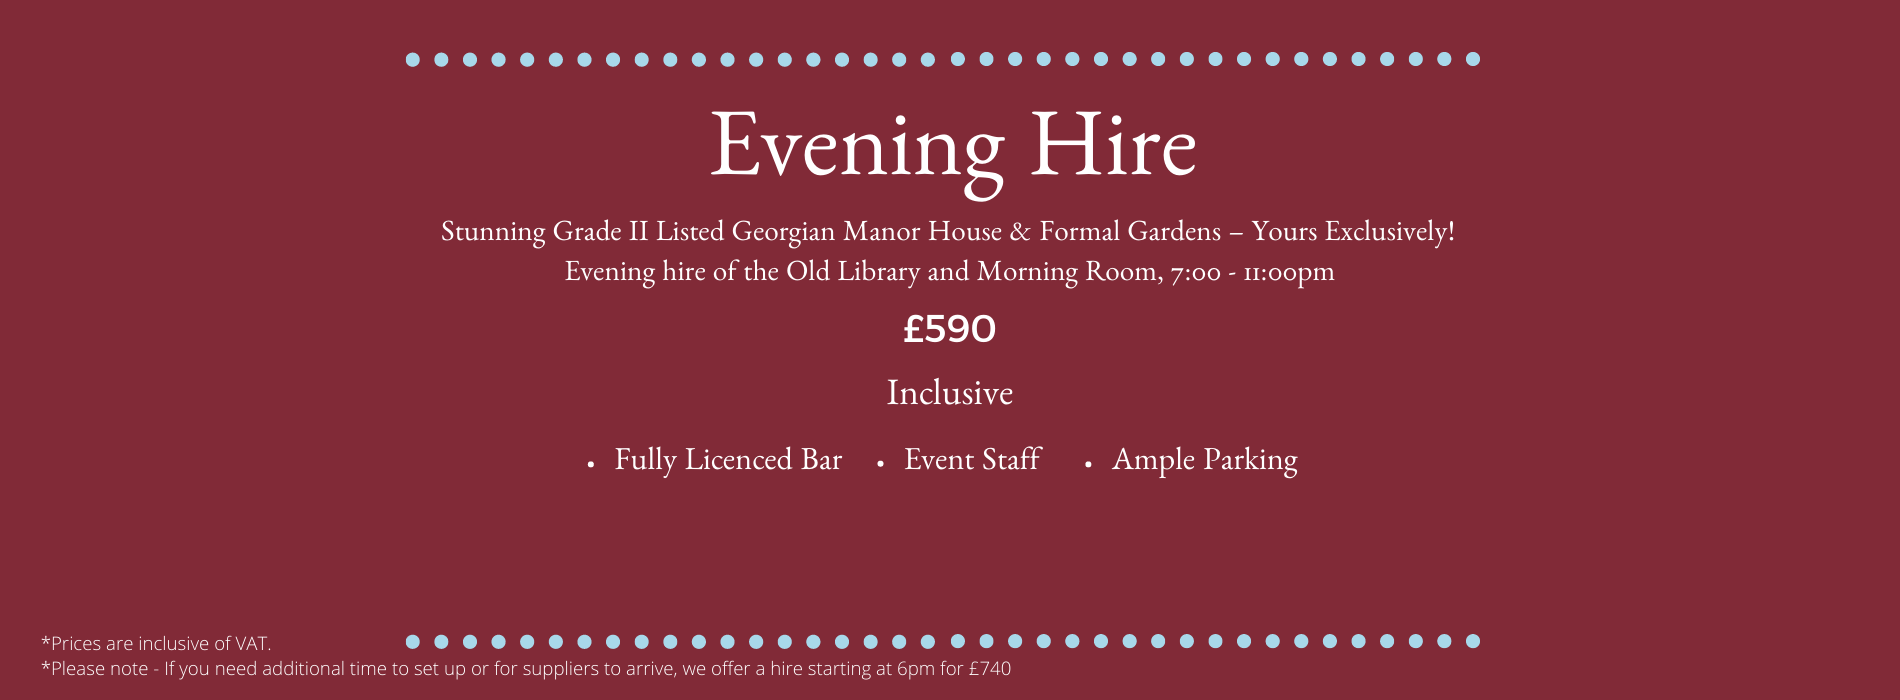 Wedding Packages & Rates - Merley House